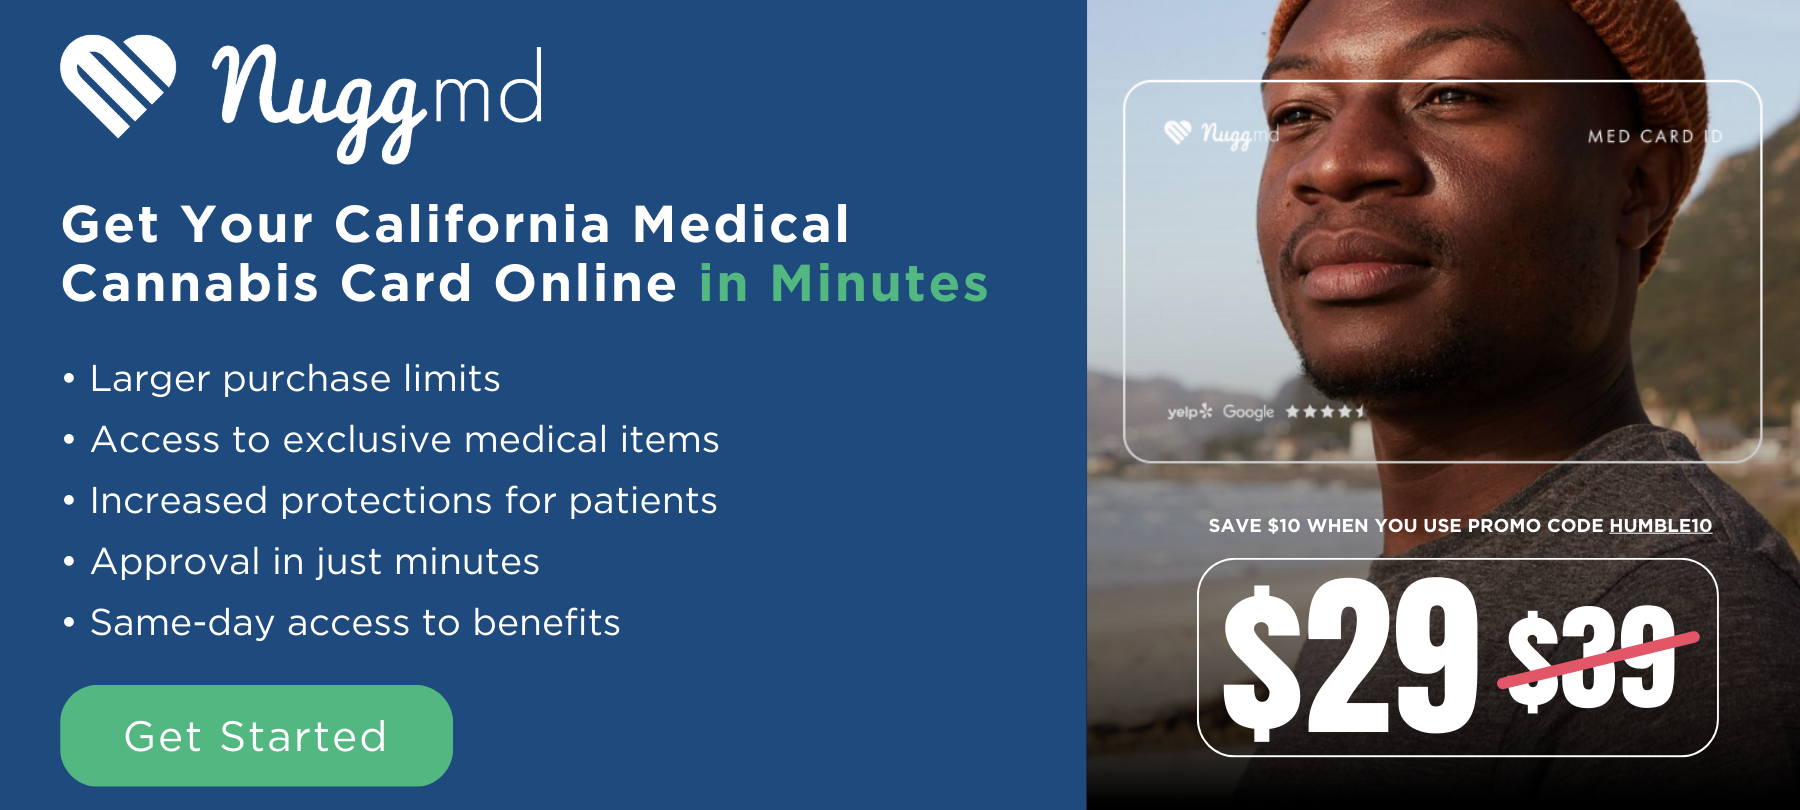 Get Your California Medical Cannabis Card Online in Minutes